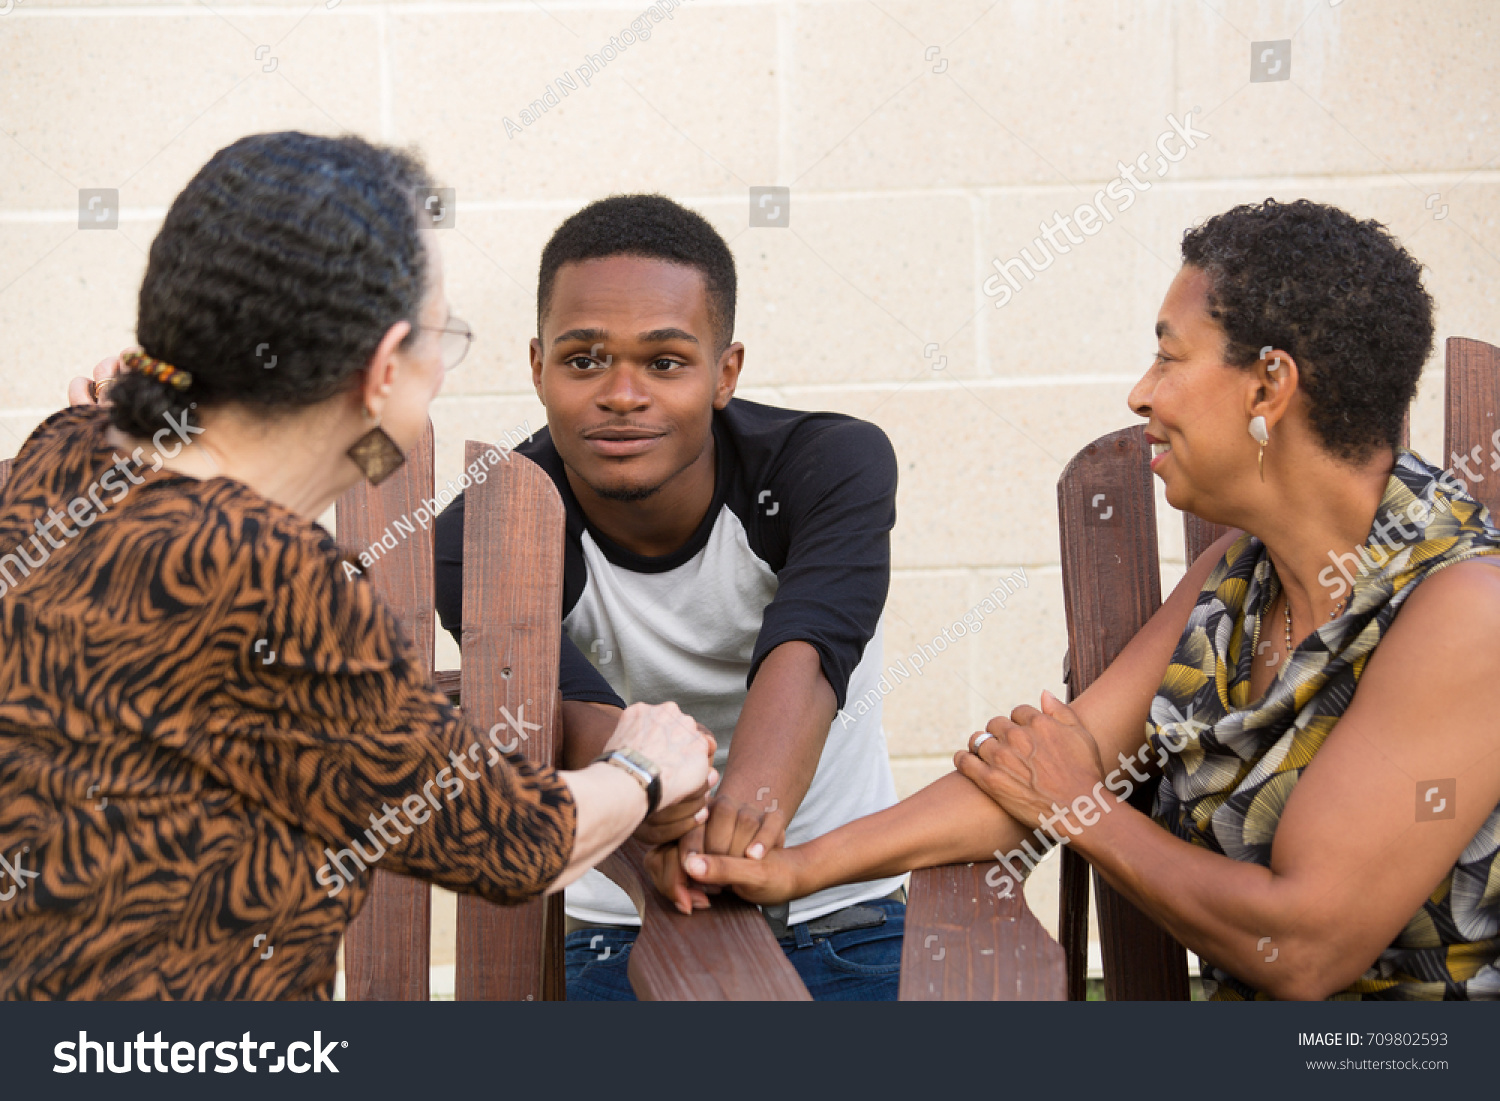 Closeup portrait, young handsome man having conversation with family sitting down, isolated outdoors background #709802593